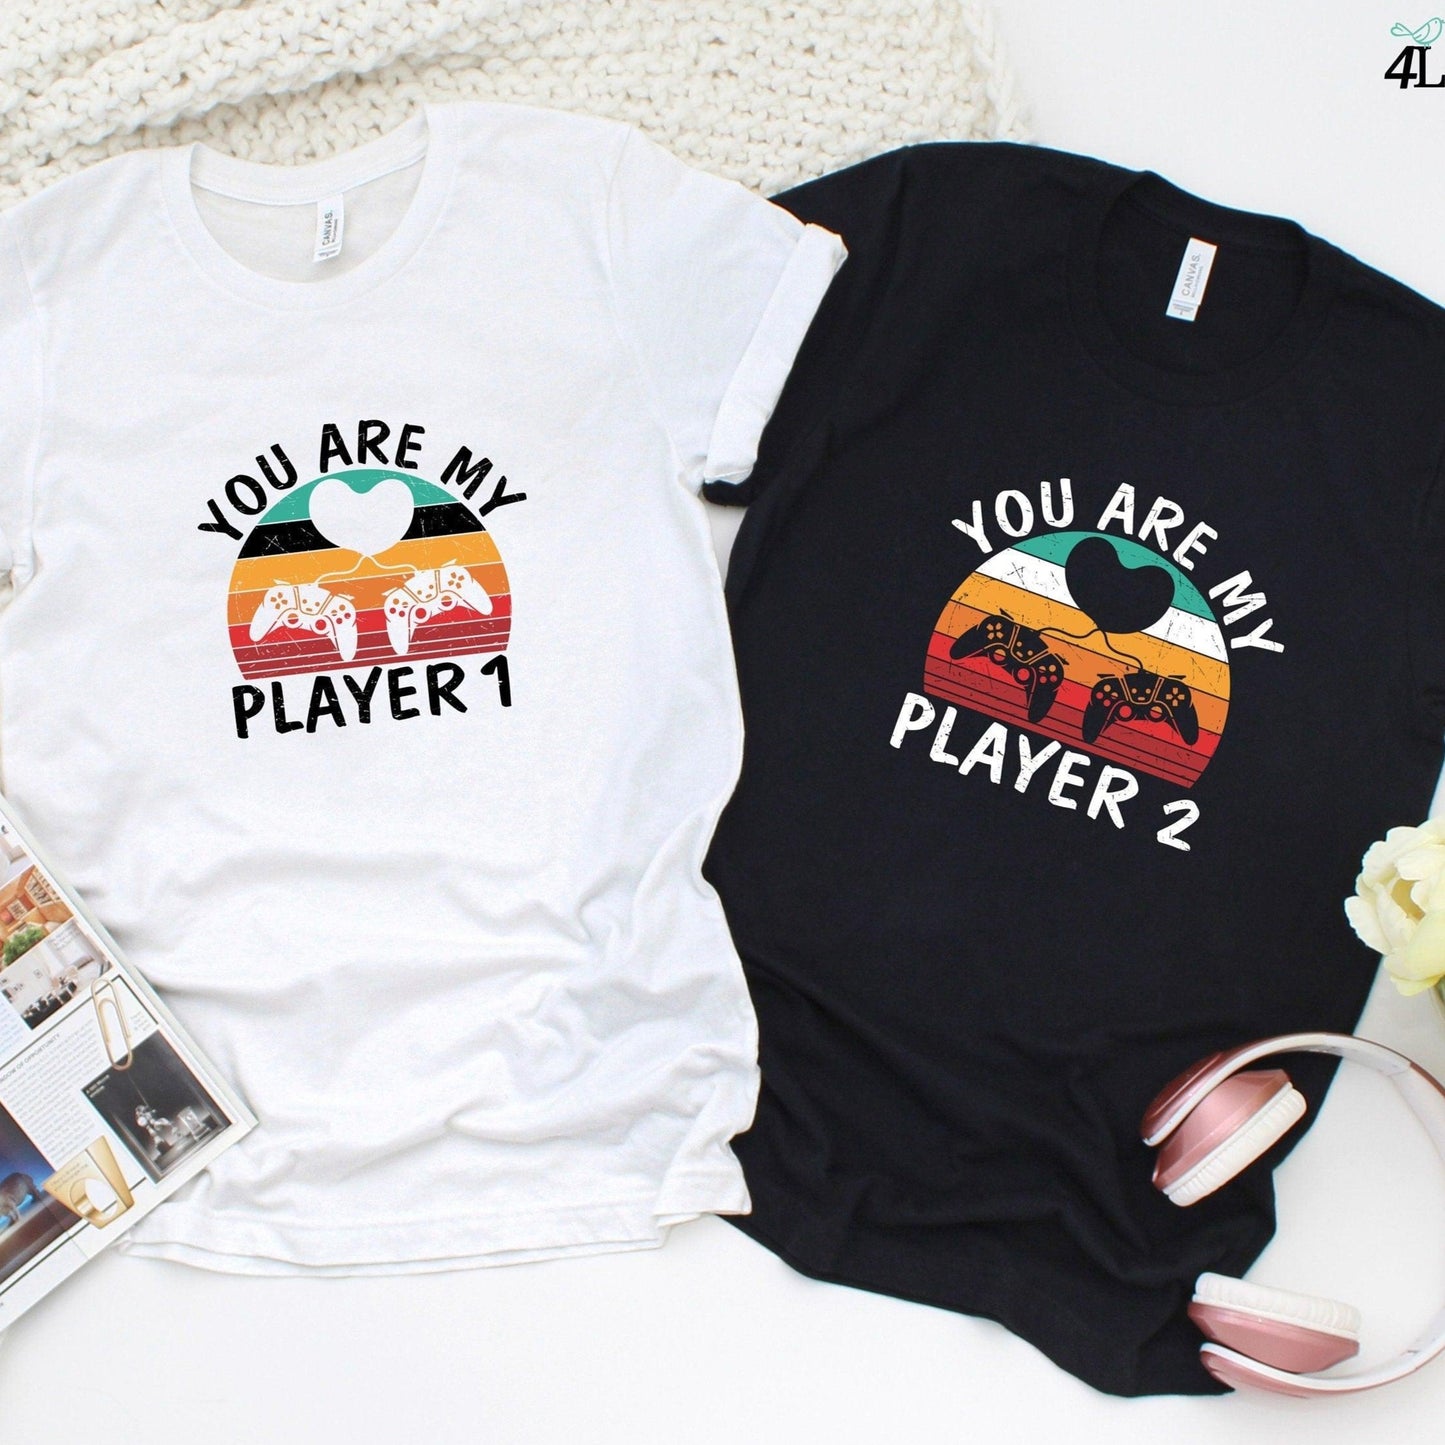 You are my player 1 / 2Hoodie, Lovers matching T-shirt, Gift for Couples, Valentine Sweatshirt, Gaming Couple Longsleeve, Geek Couple Tshirt - 4Lovebirds